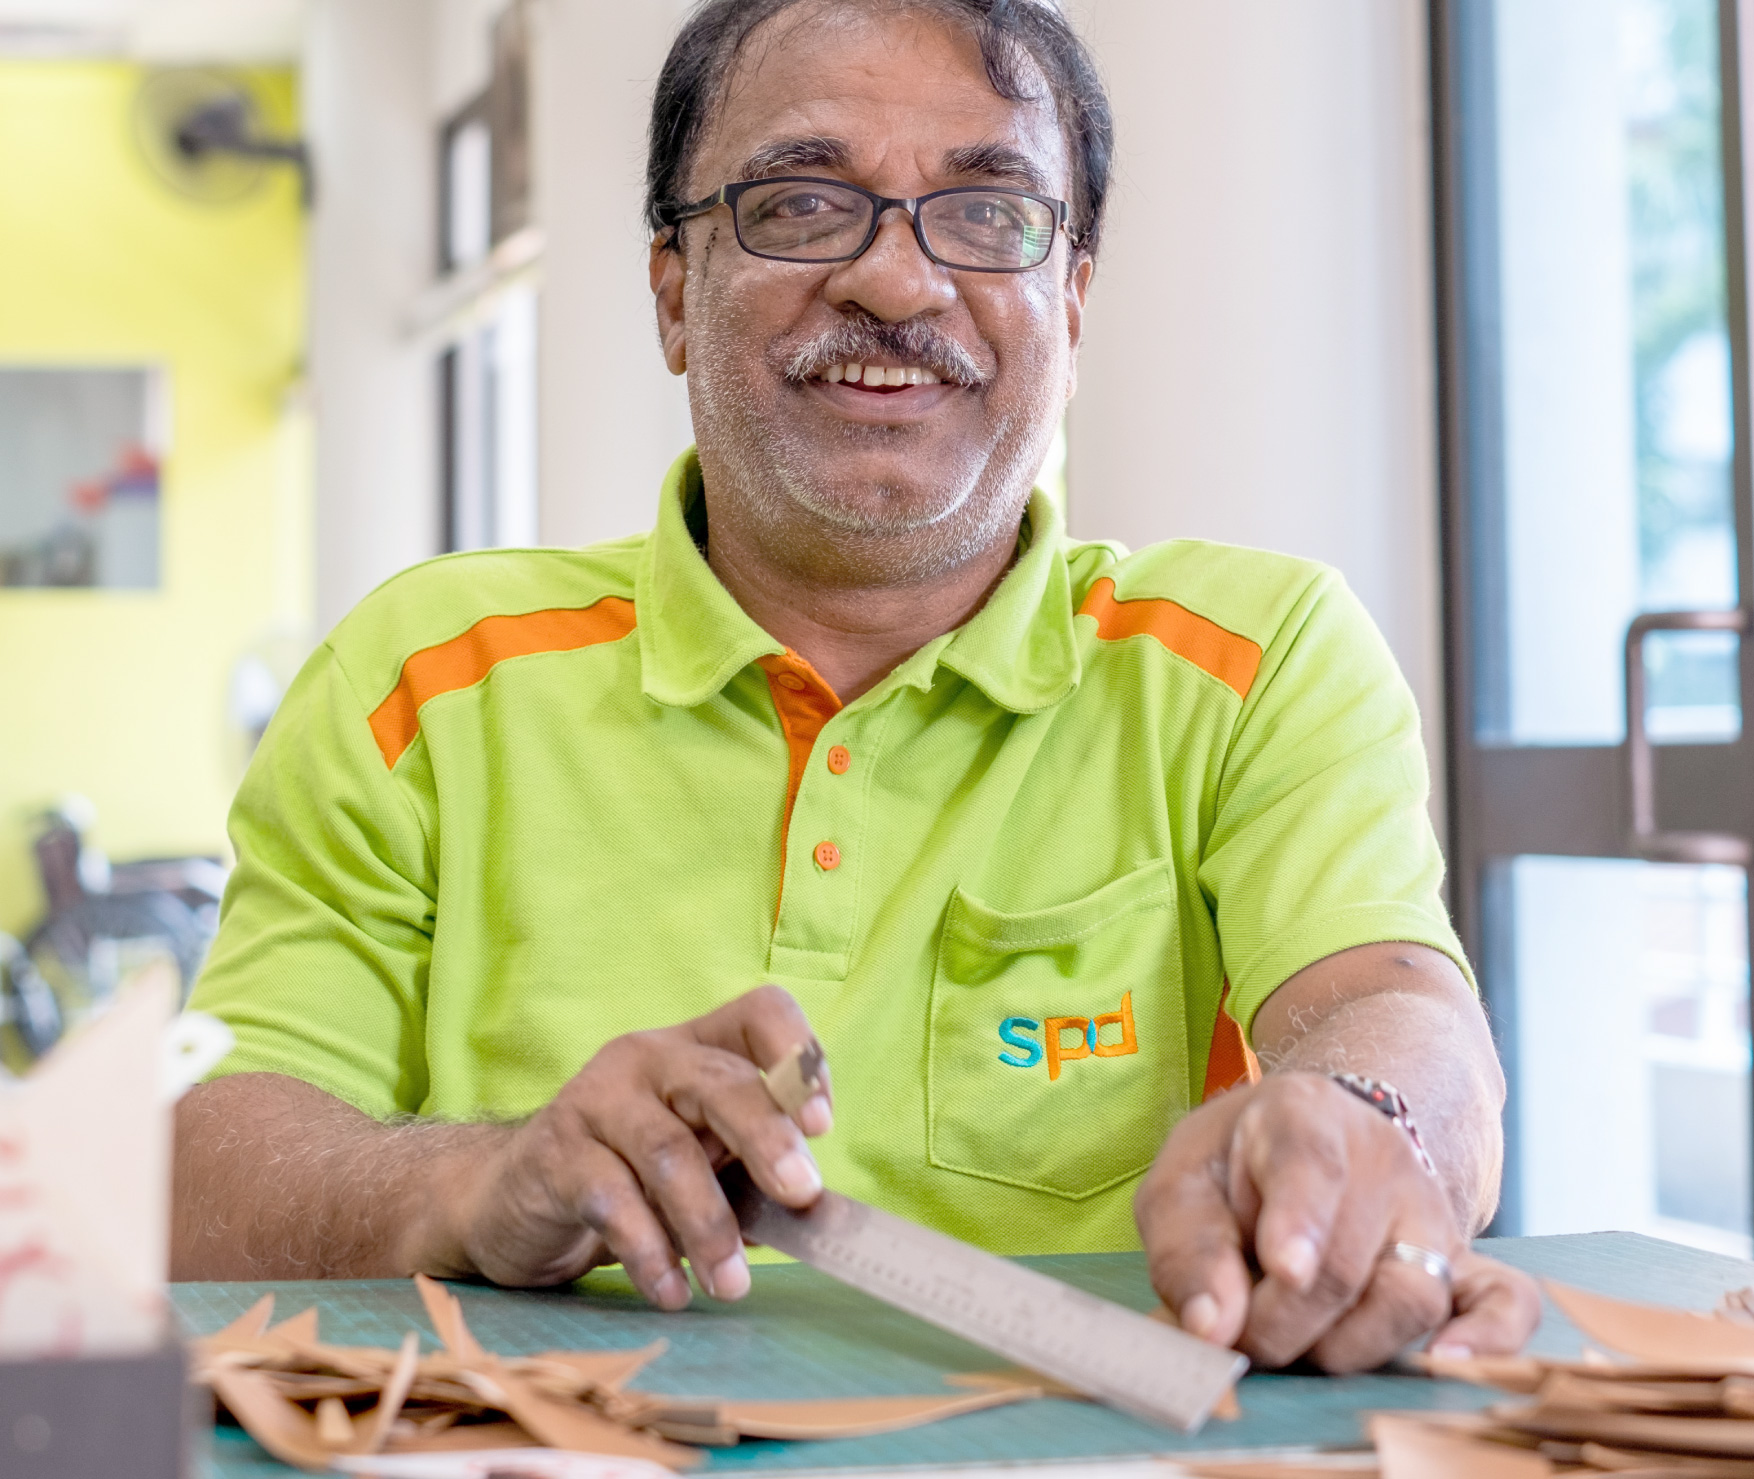 Mohamed Hussain from SPD joyfully smiles at the camera while assembling pieces of the journal